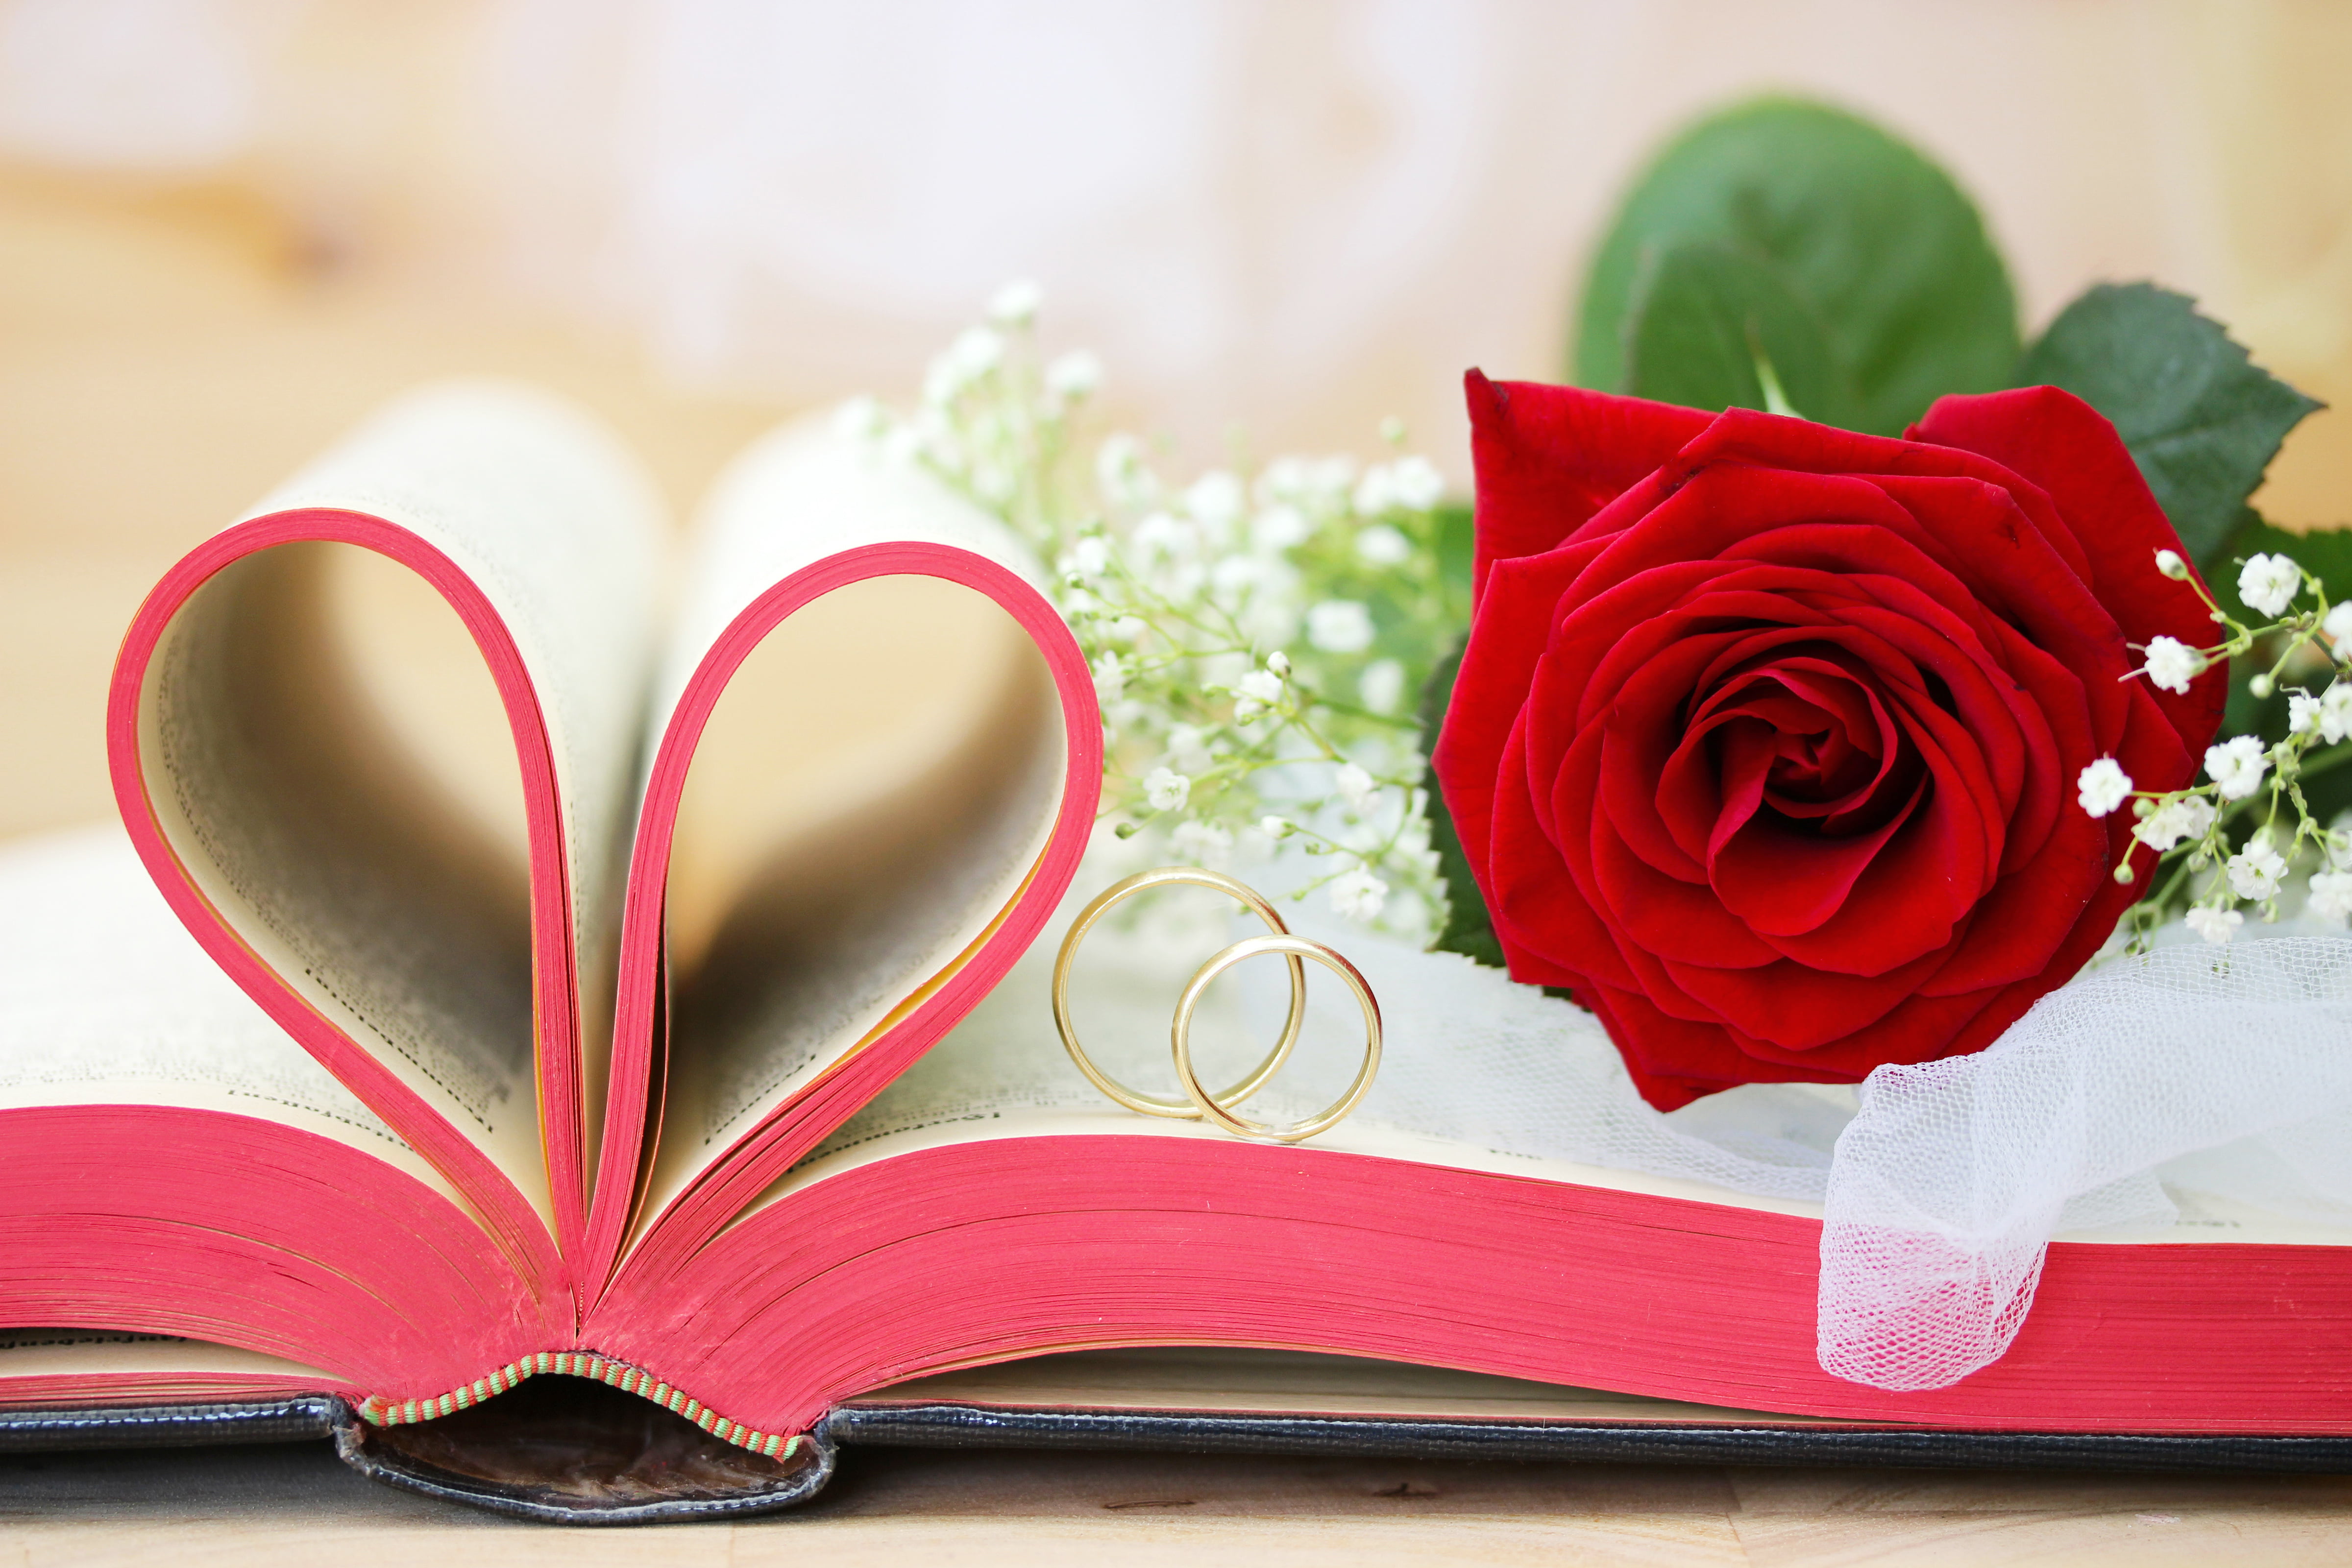 red rose and two gold-colored rings, book, wedding, flowers, engagement rings